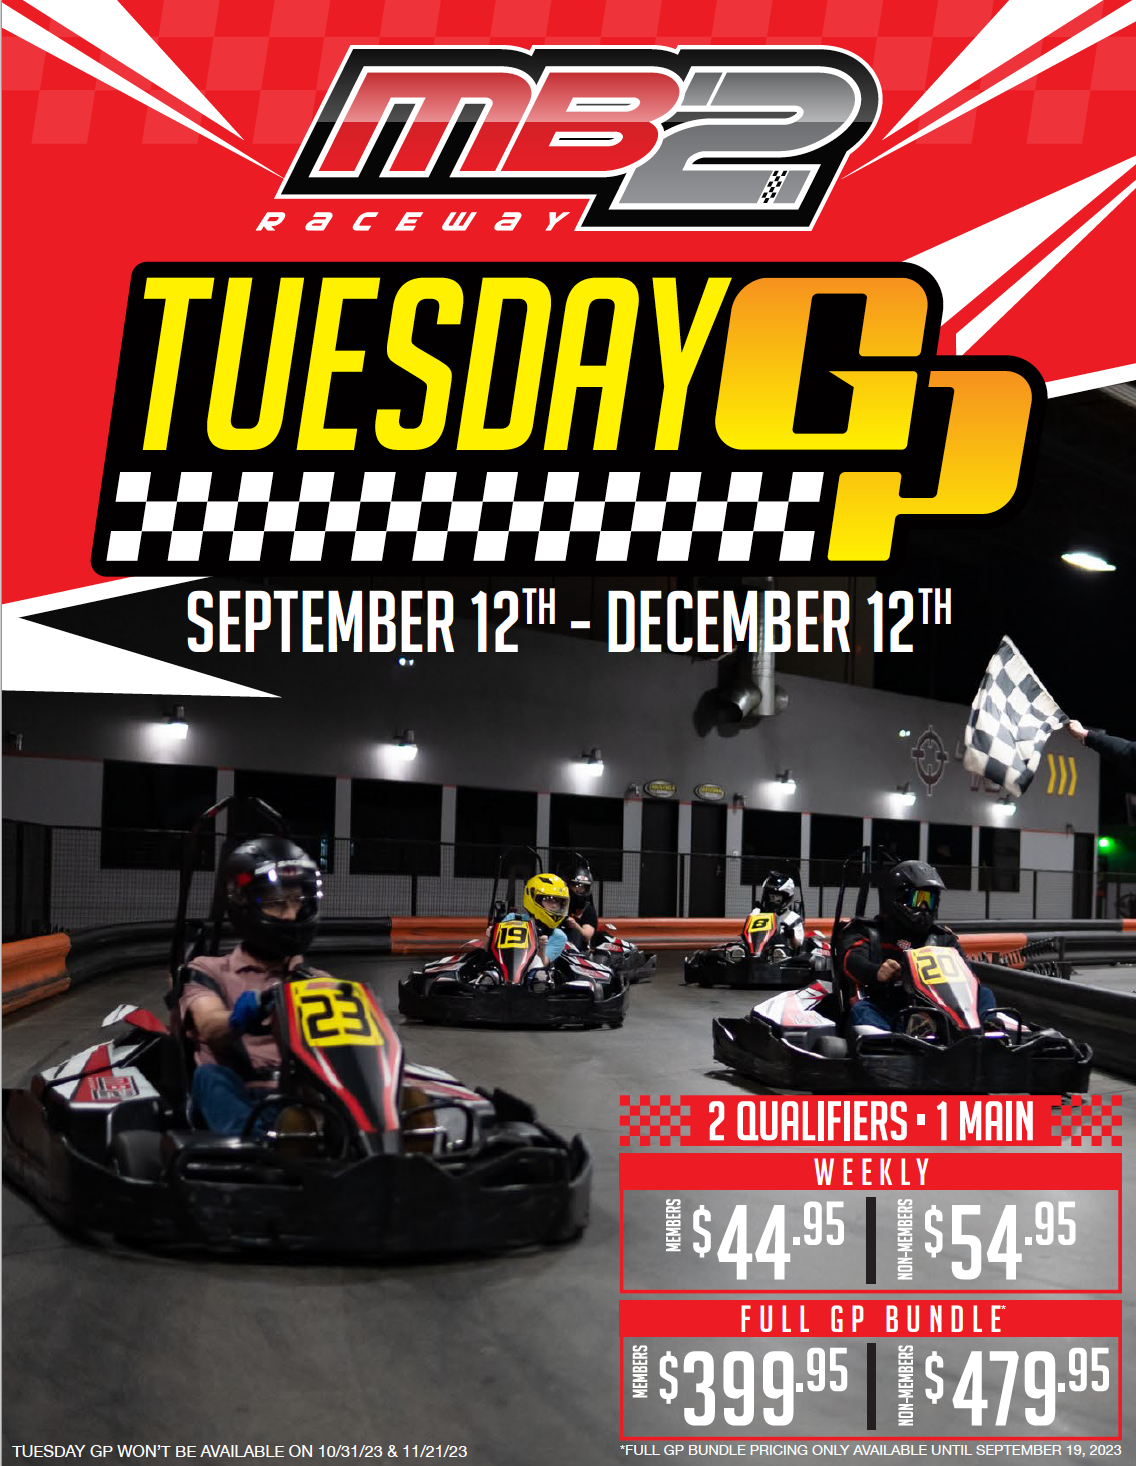 Anti-street racing event makes debut at MB2 Raceway in Sylmar – Daily News